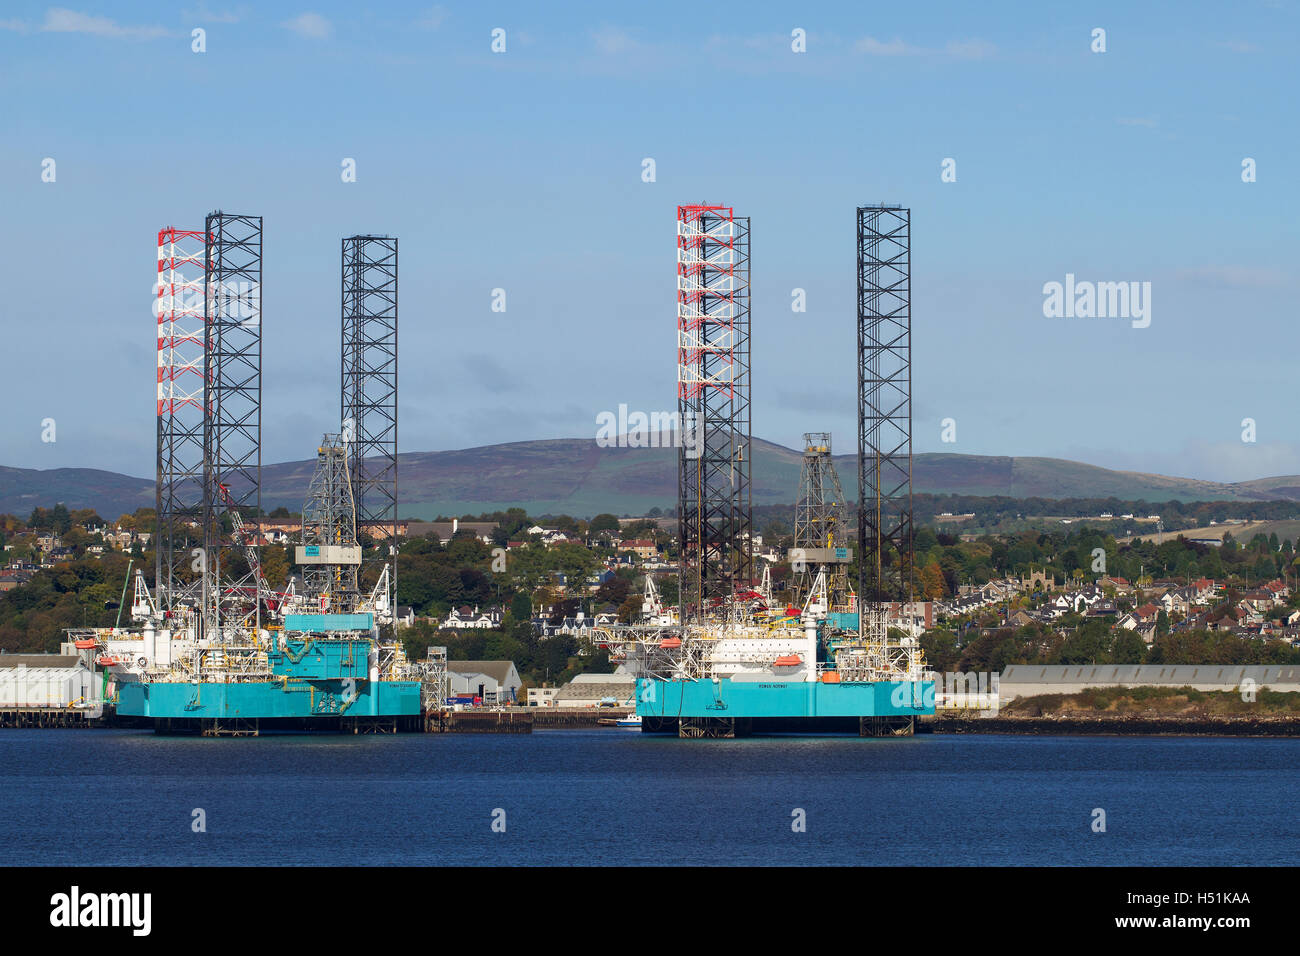 Oil rigs Rowan Stavanger and Rowan Norway side by side at Prince Charles Wharf undergoing maintenance repairs in Dundee, UK Stock Photo